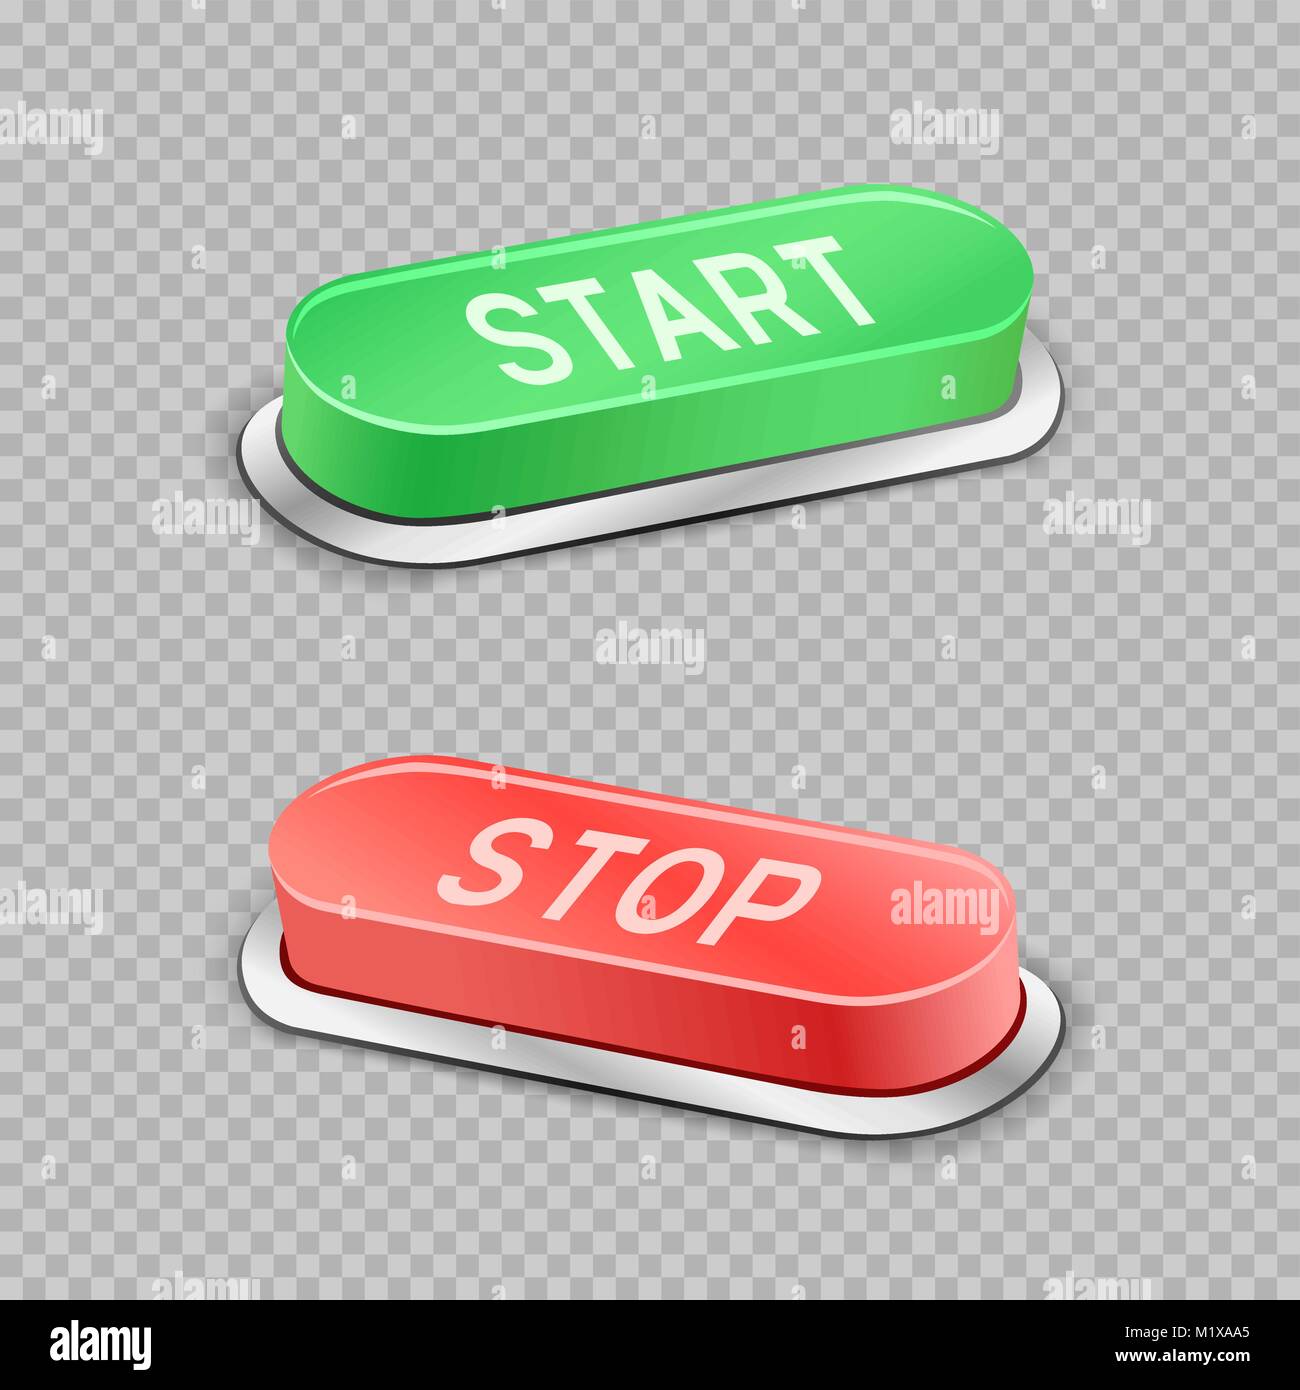 Start And Stop Large Buttons With Shadow On Transparent Background